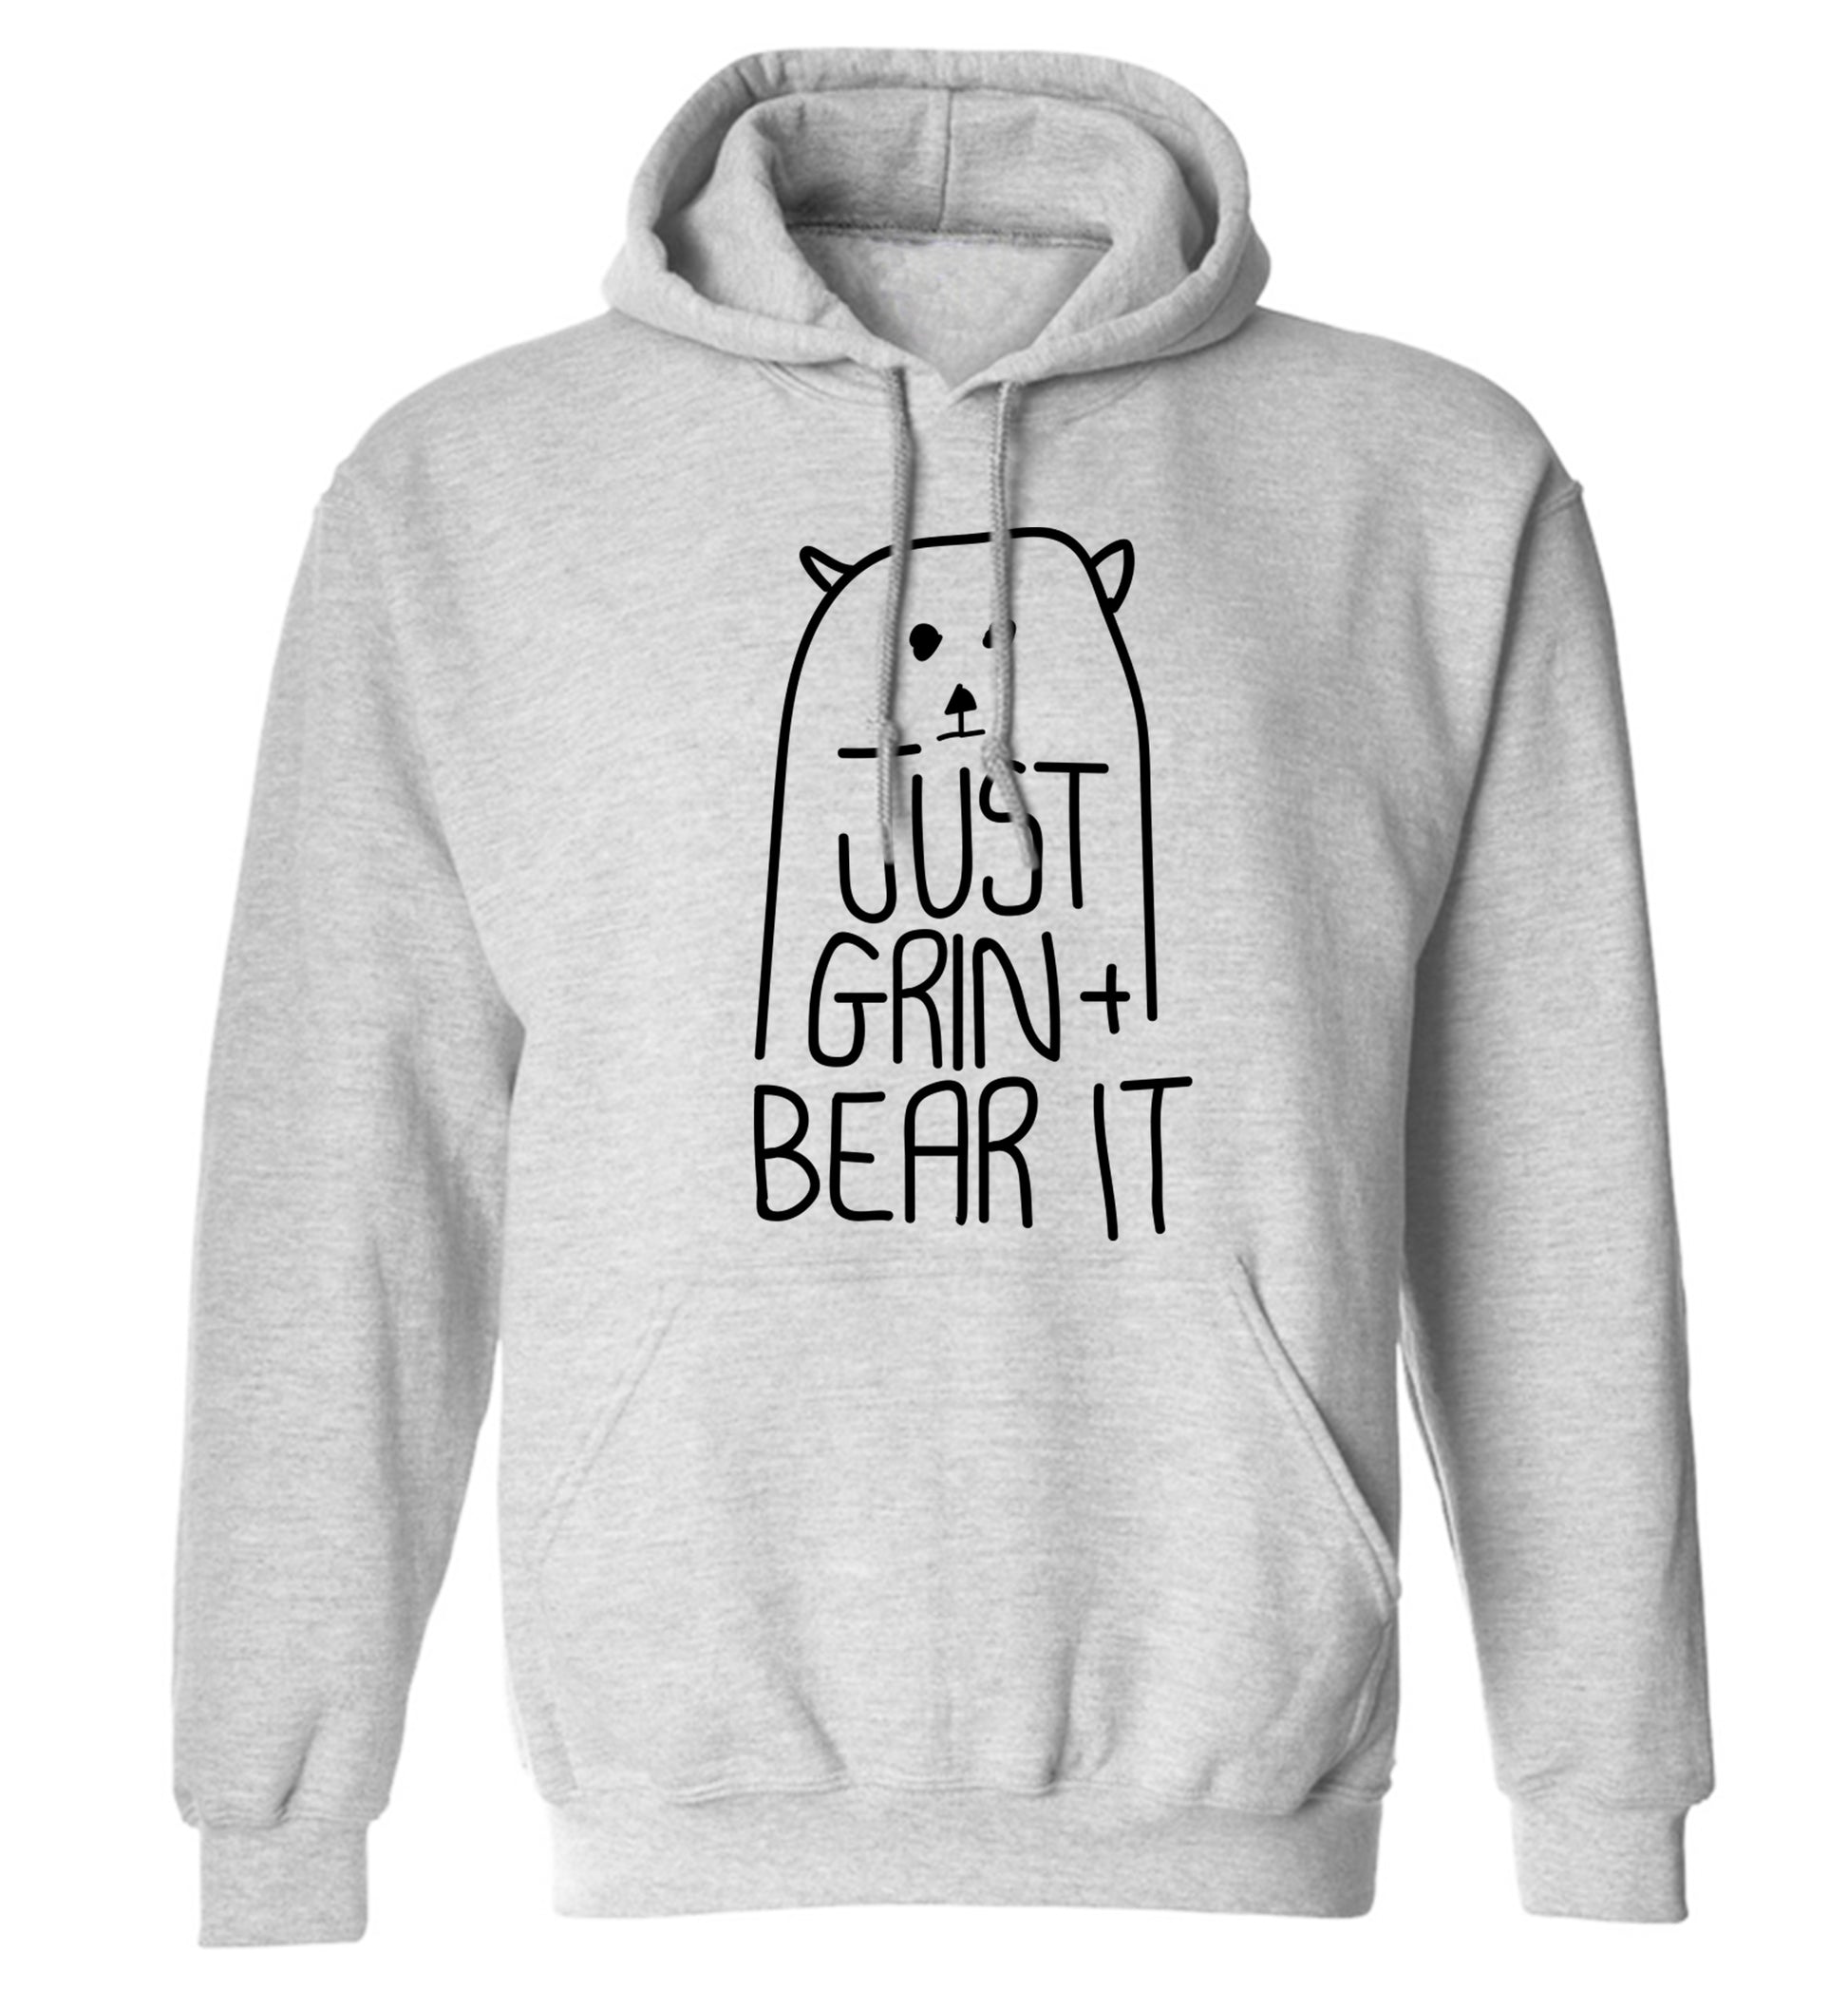 Just grin and bear it adults unisex grey hoodie 2XL